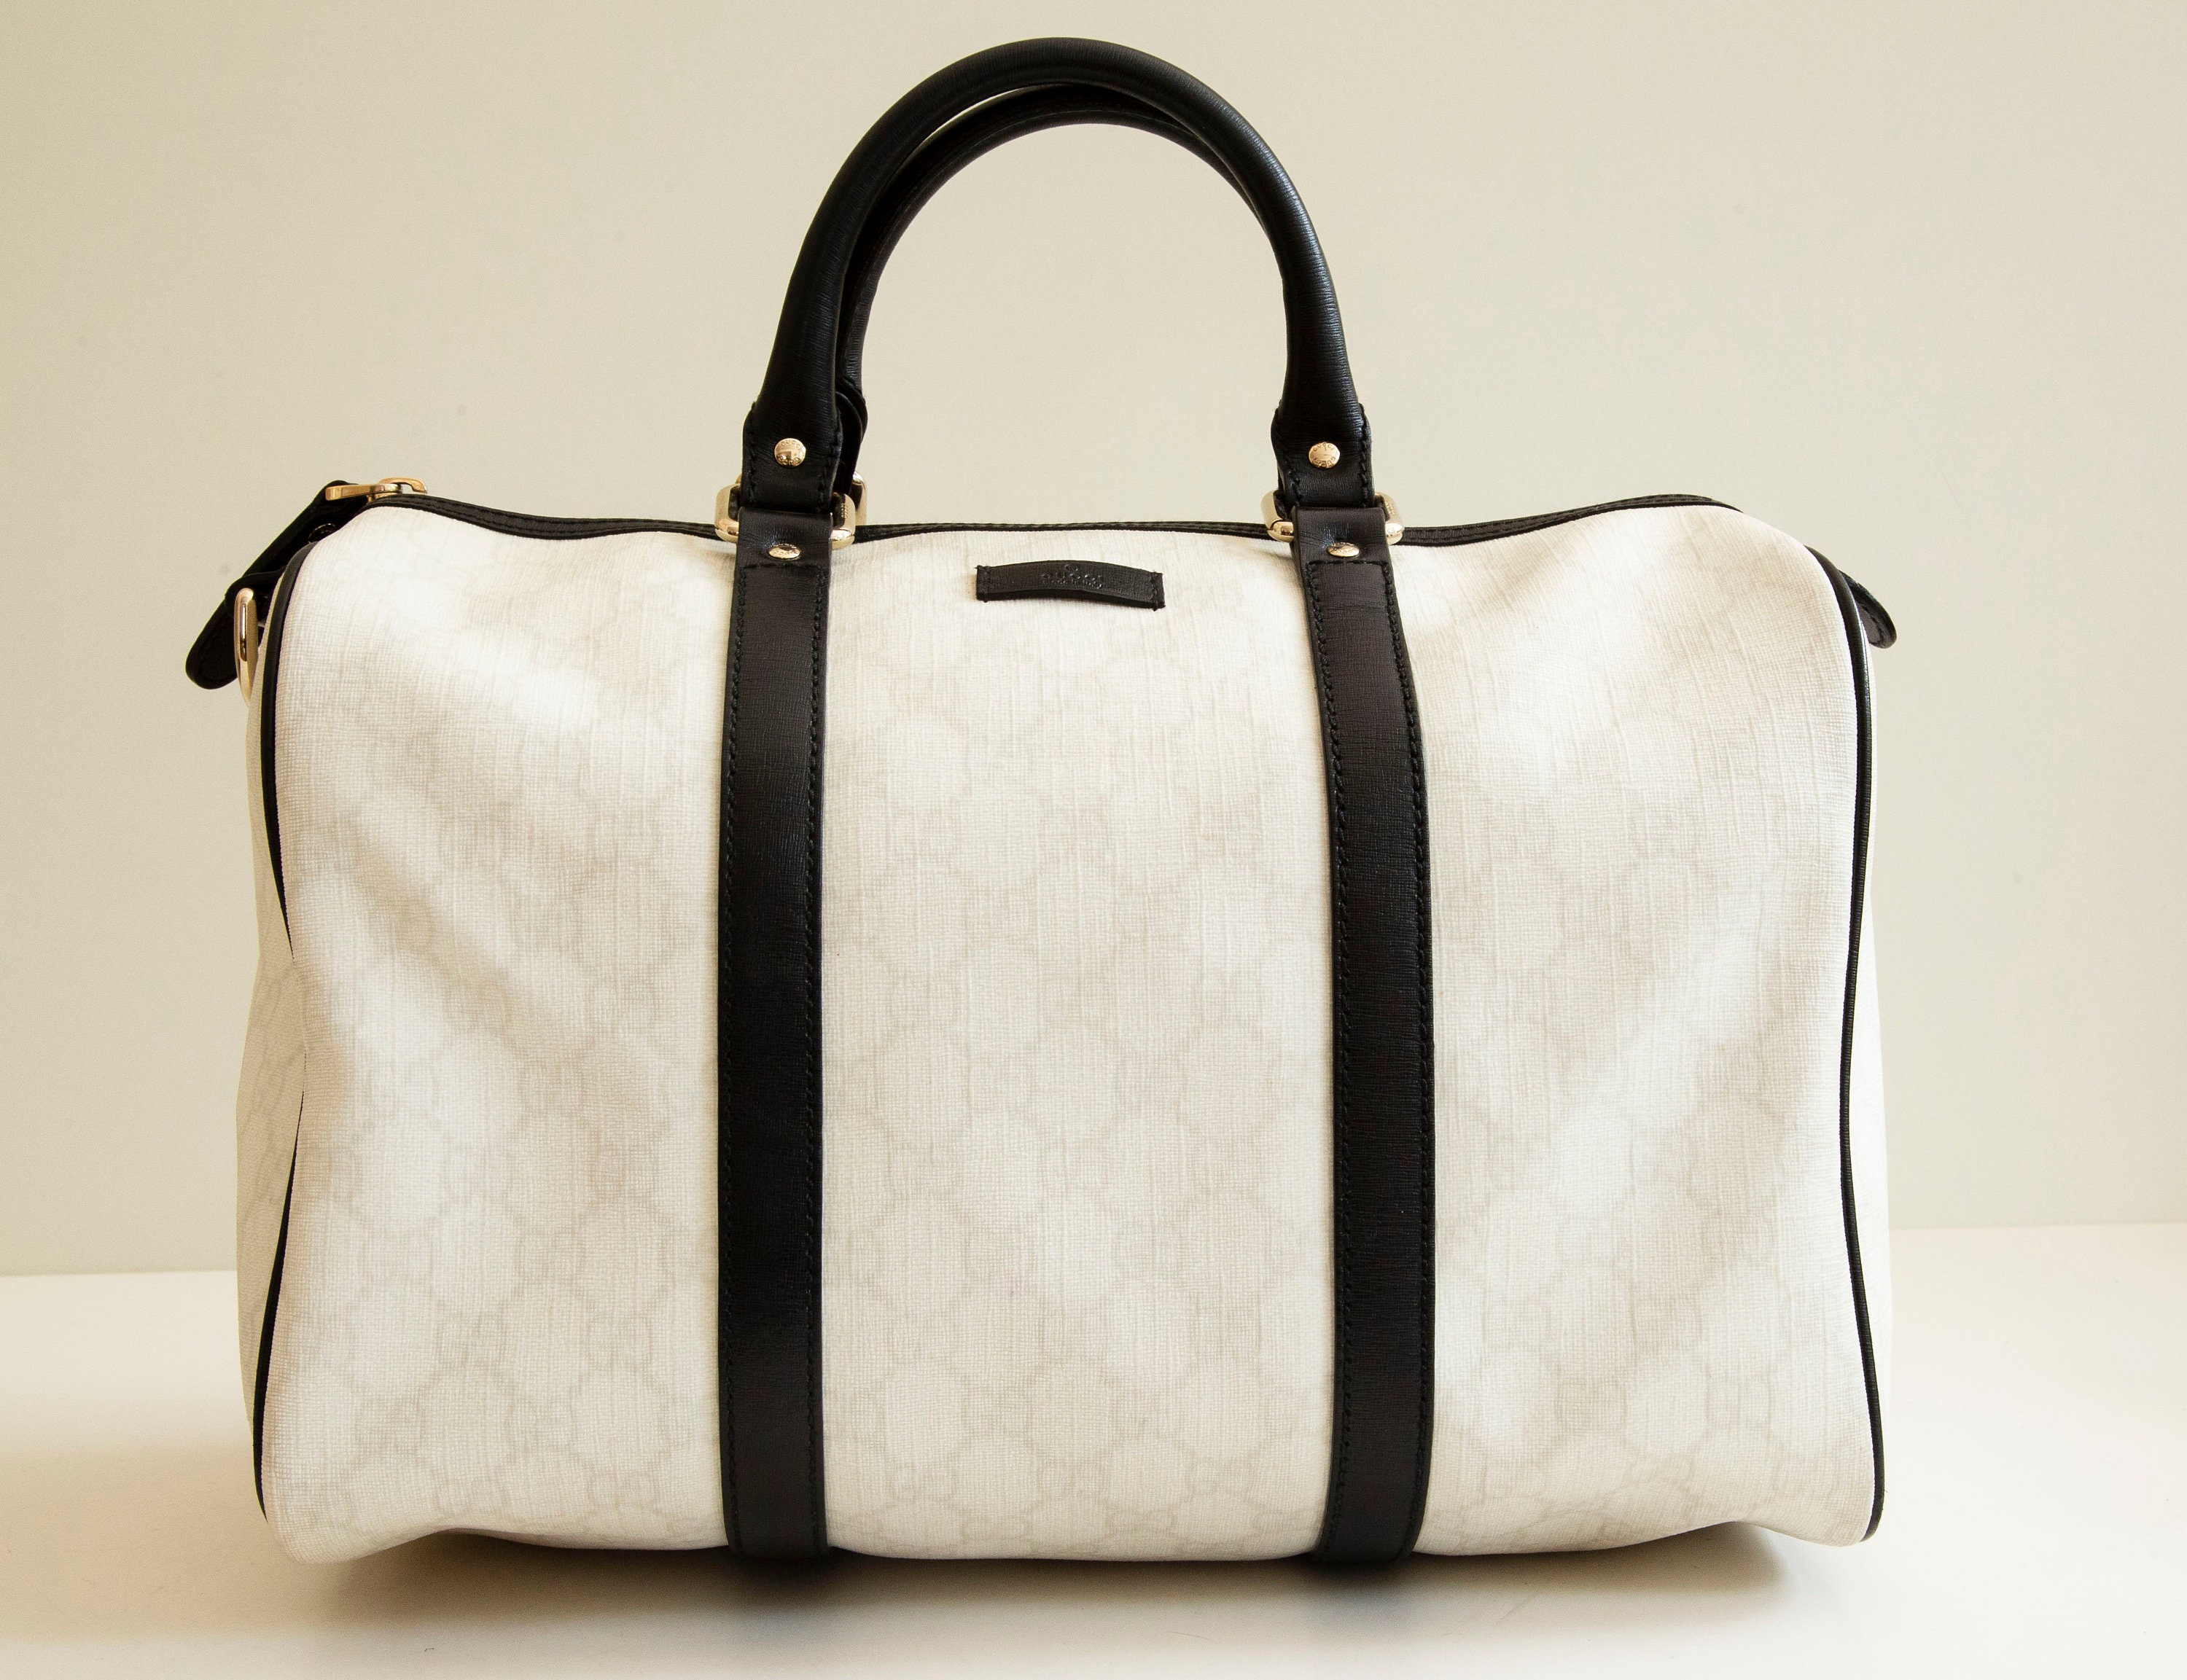 Buy Gucci Boston Bag Online In India -  India